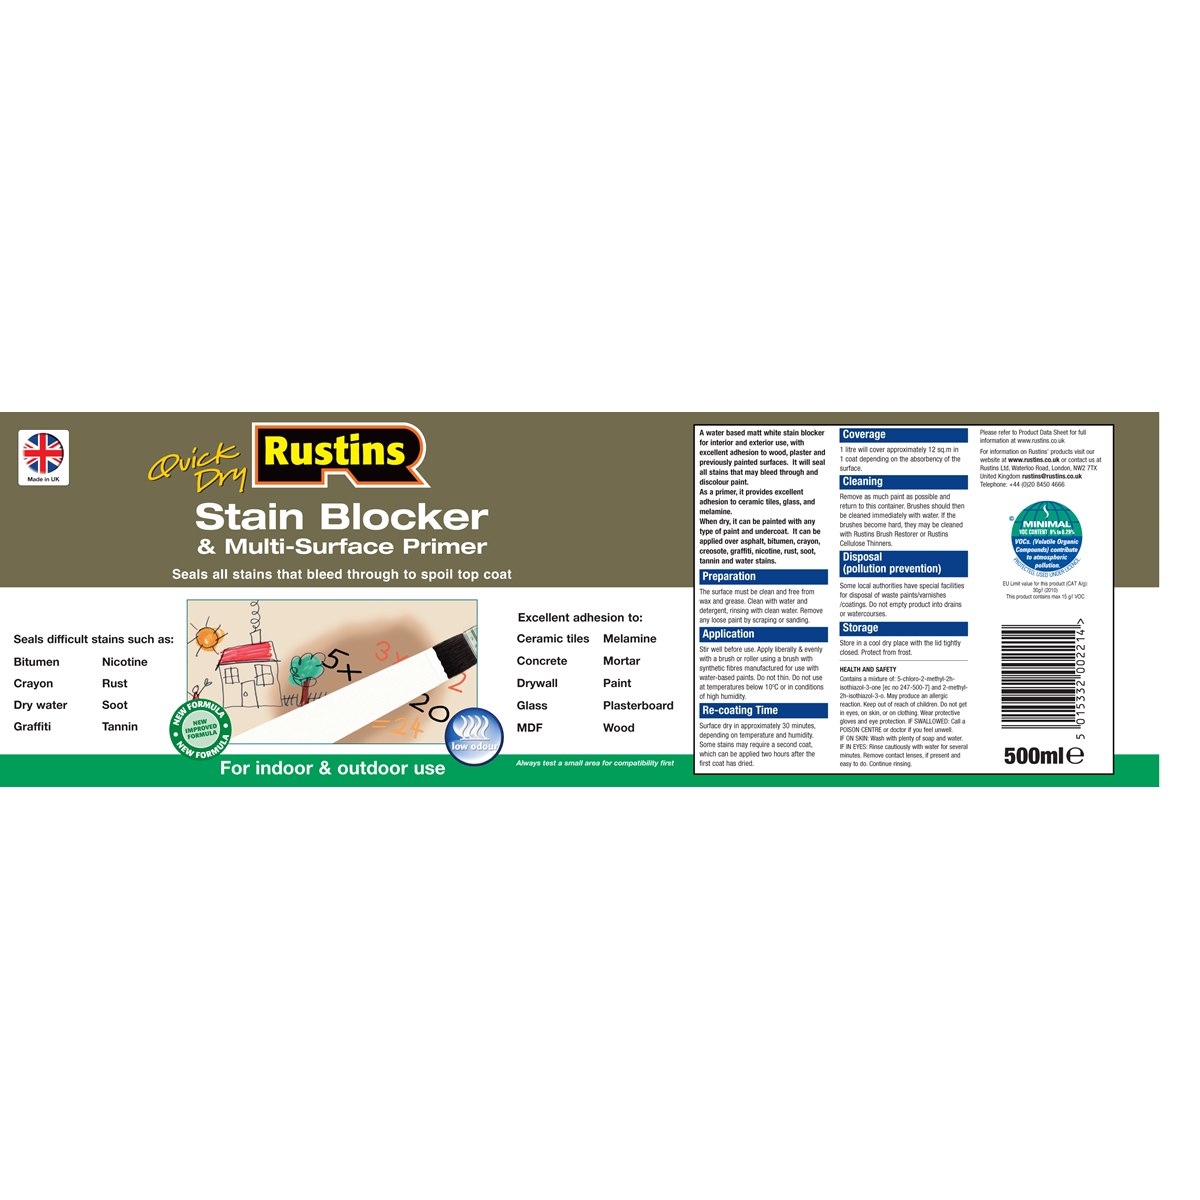 Rustins Stain Blocker and Multi-Surface Primer